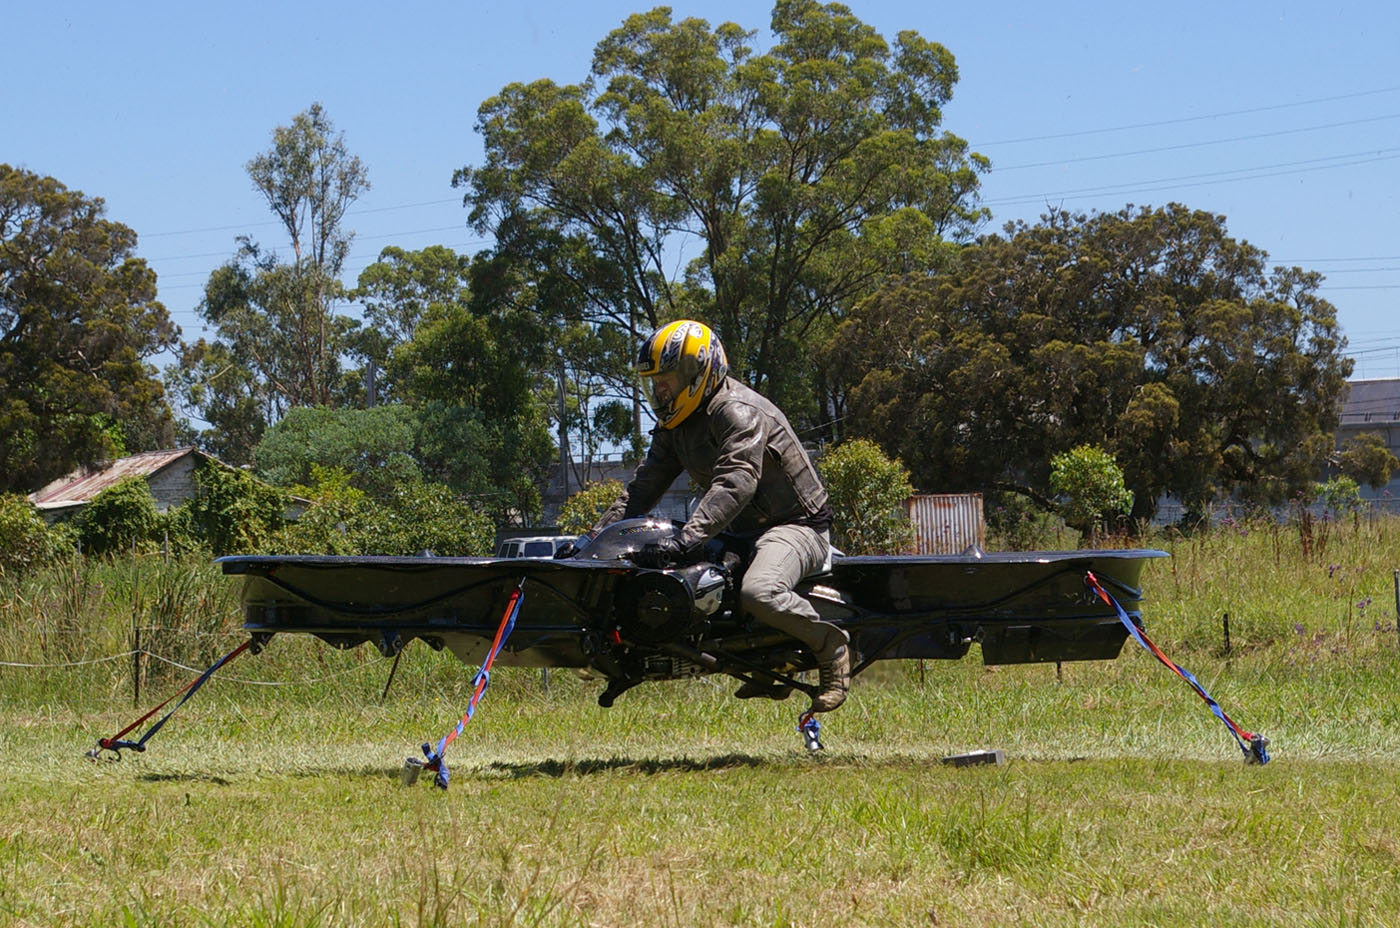 BMW-powered hoverbike has lift off